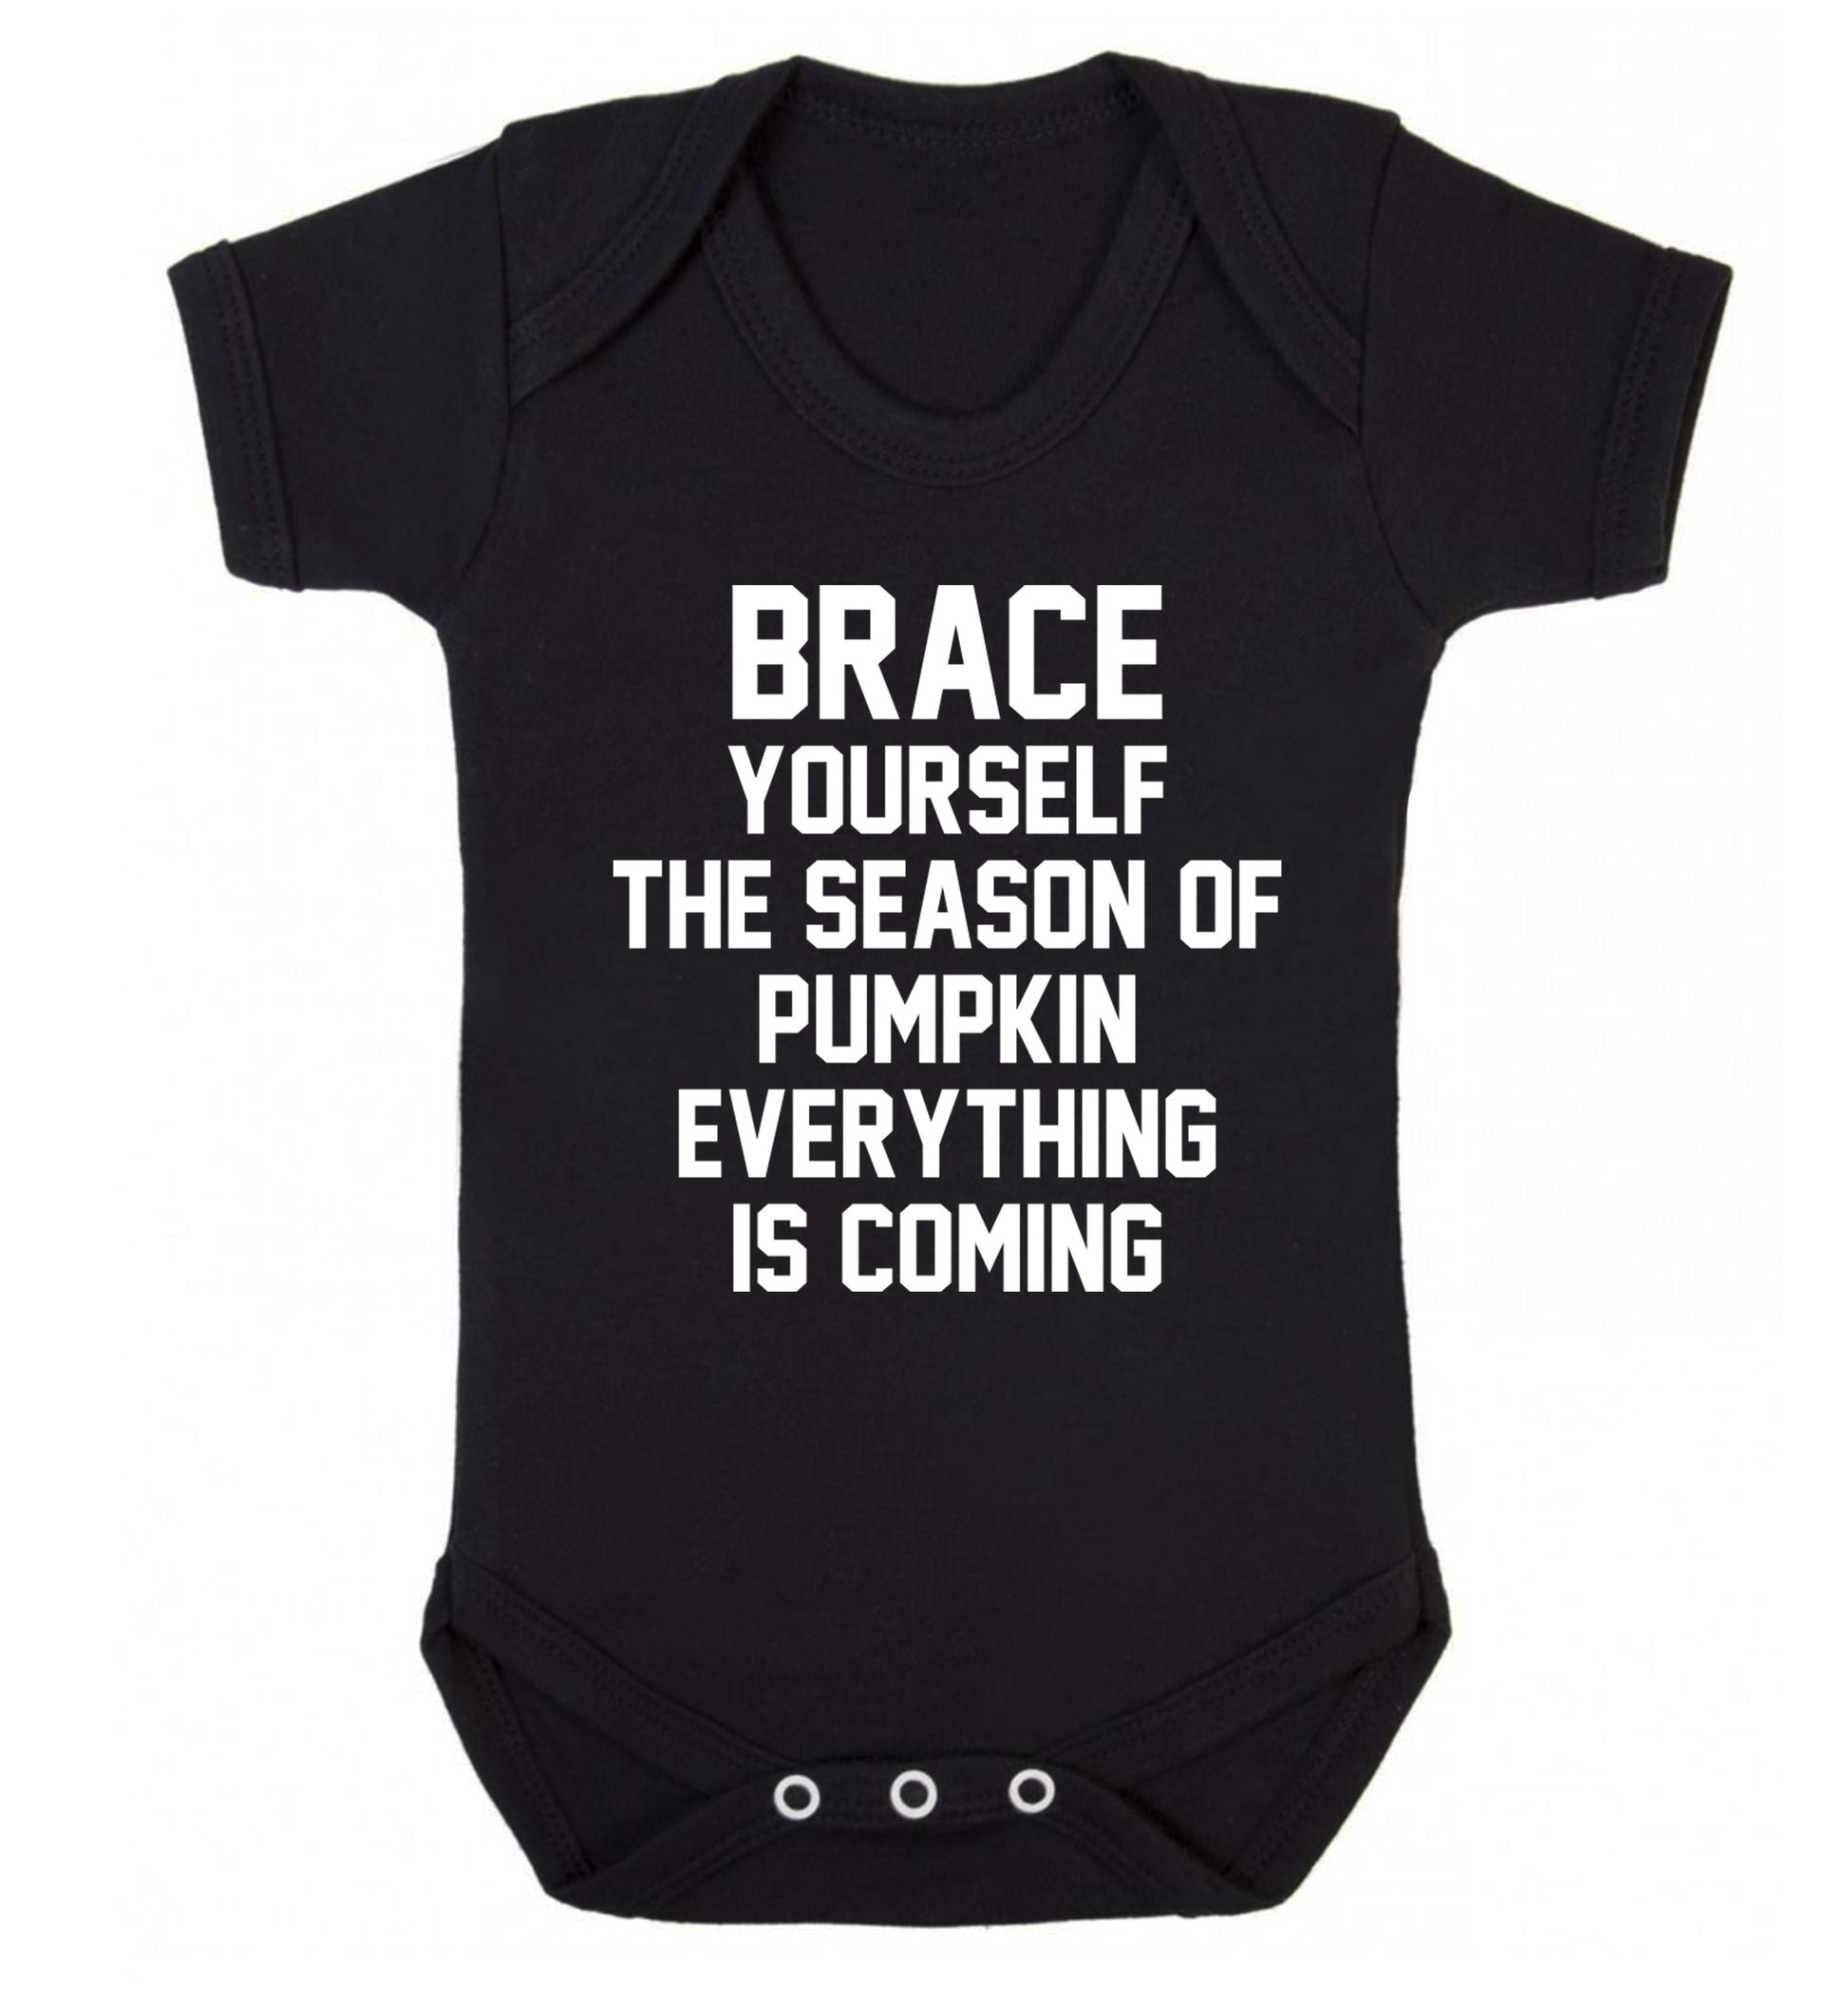 Brace yourself the season of pumpkin everything is coming Baby Vest black 18-24 months